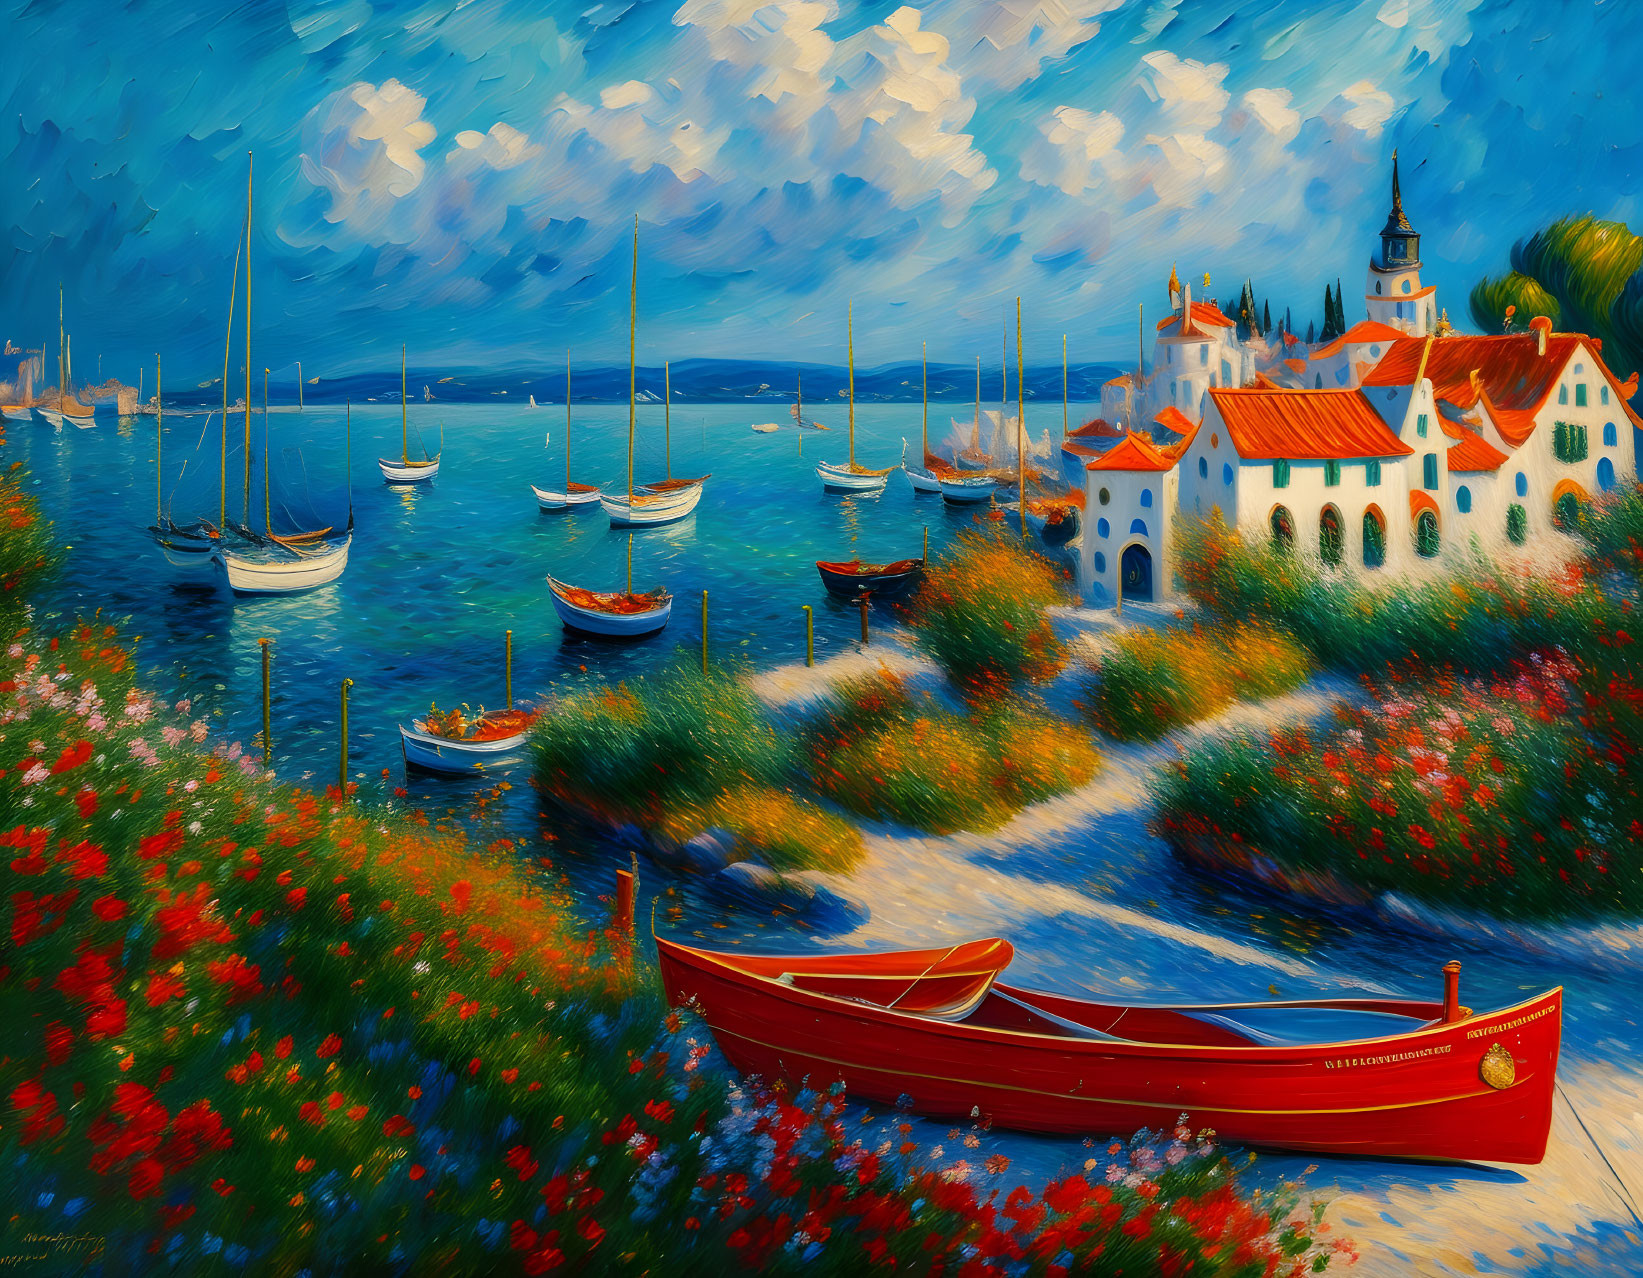 Colorful Coastal Painting with Red Boat and Sailboats